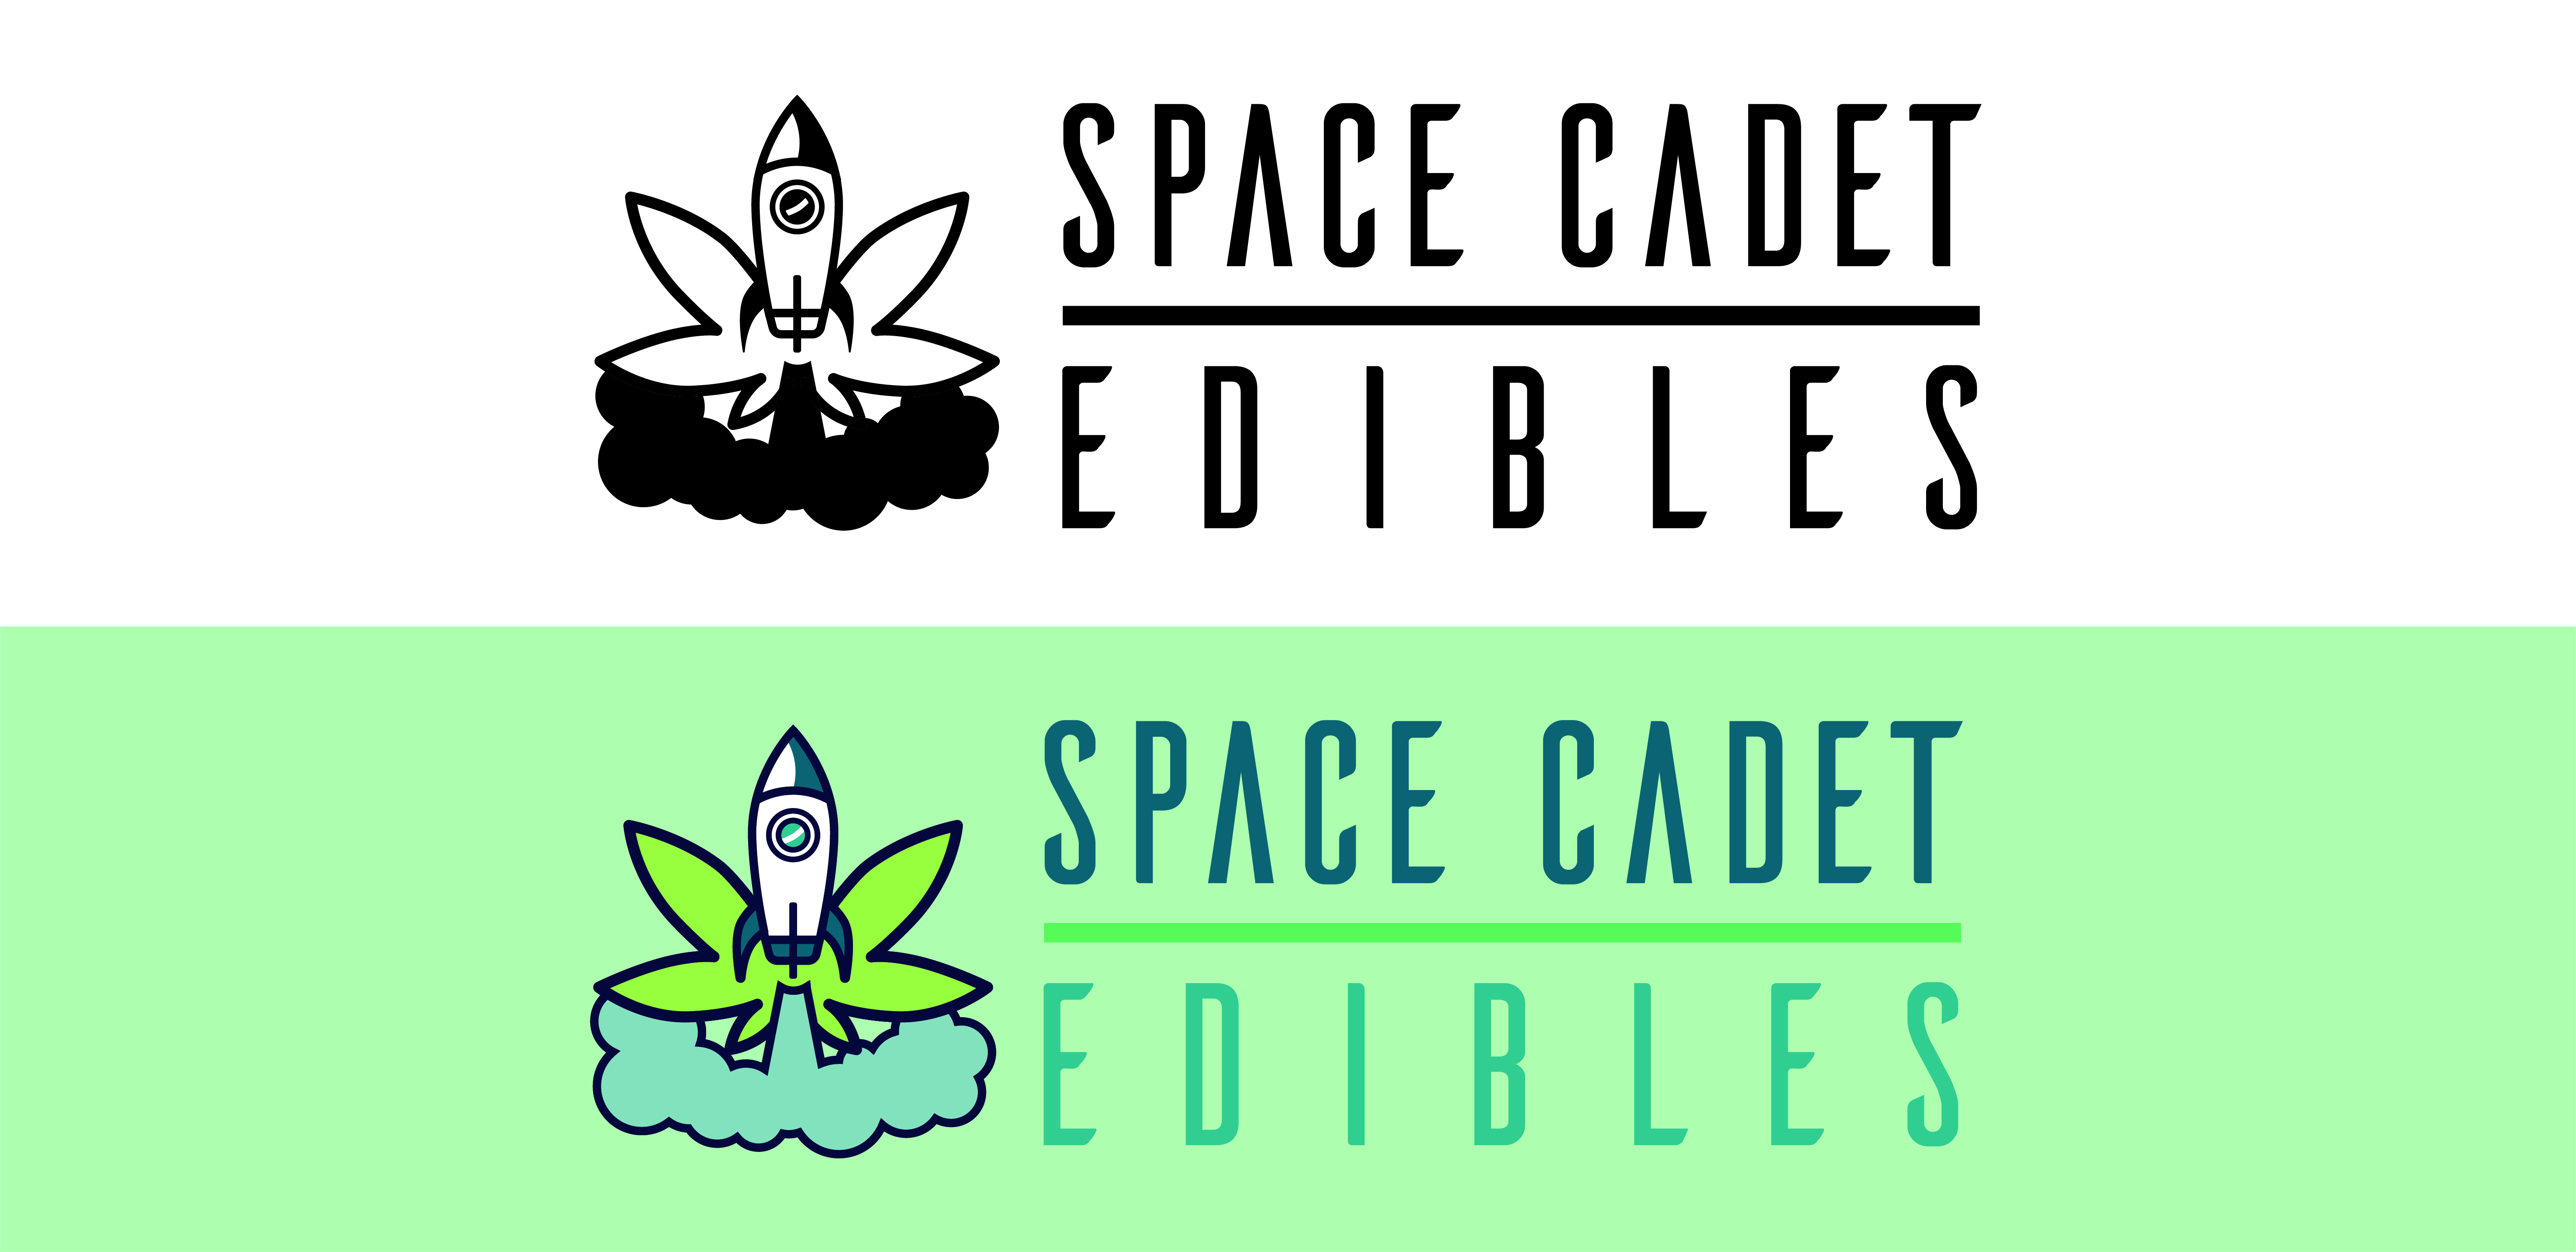 Space Cadet Edibles Logo Finals in black and white and in colour.